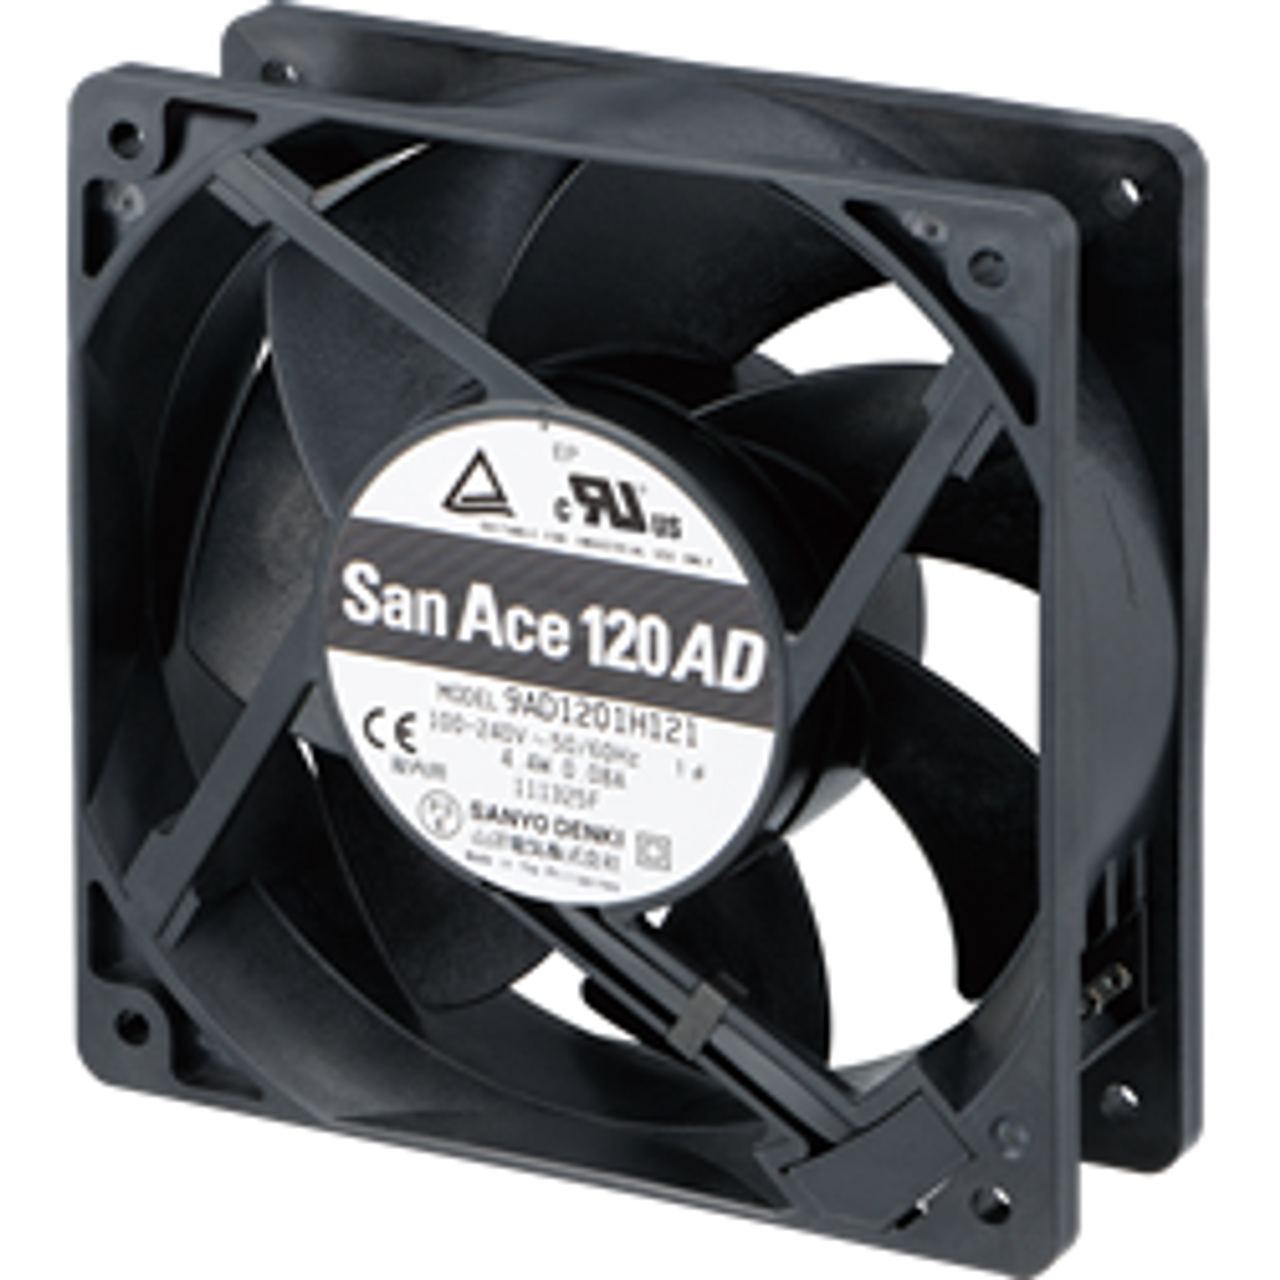 ACDC Fan  San Ace 120AD Product image